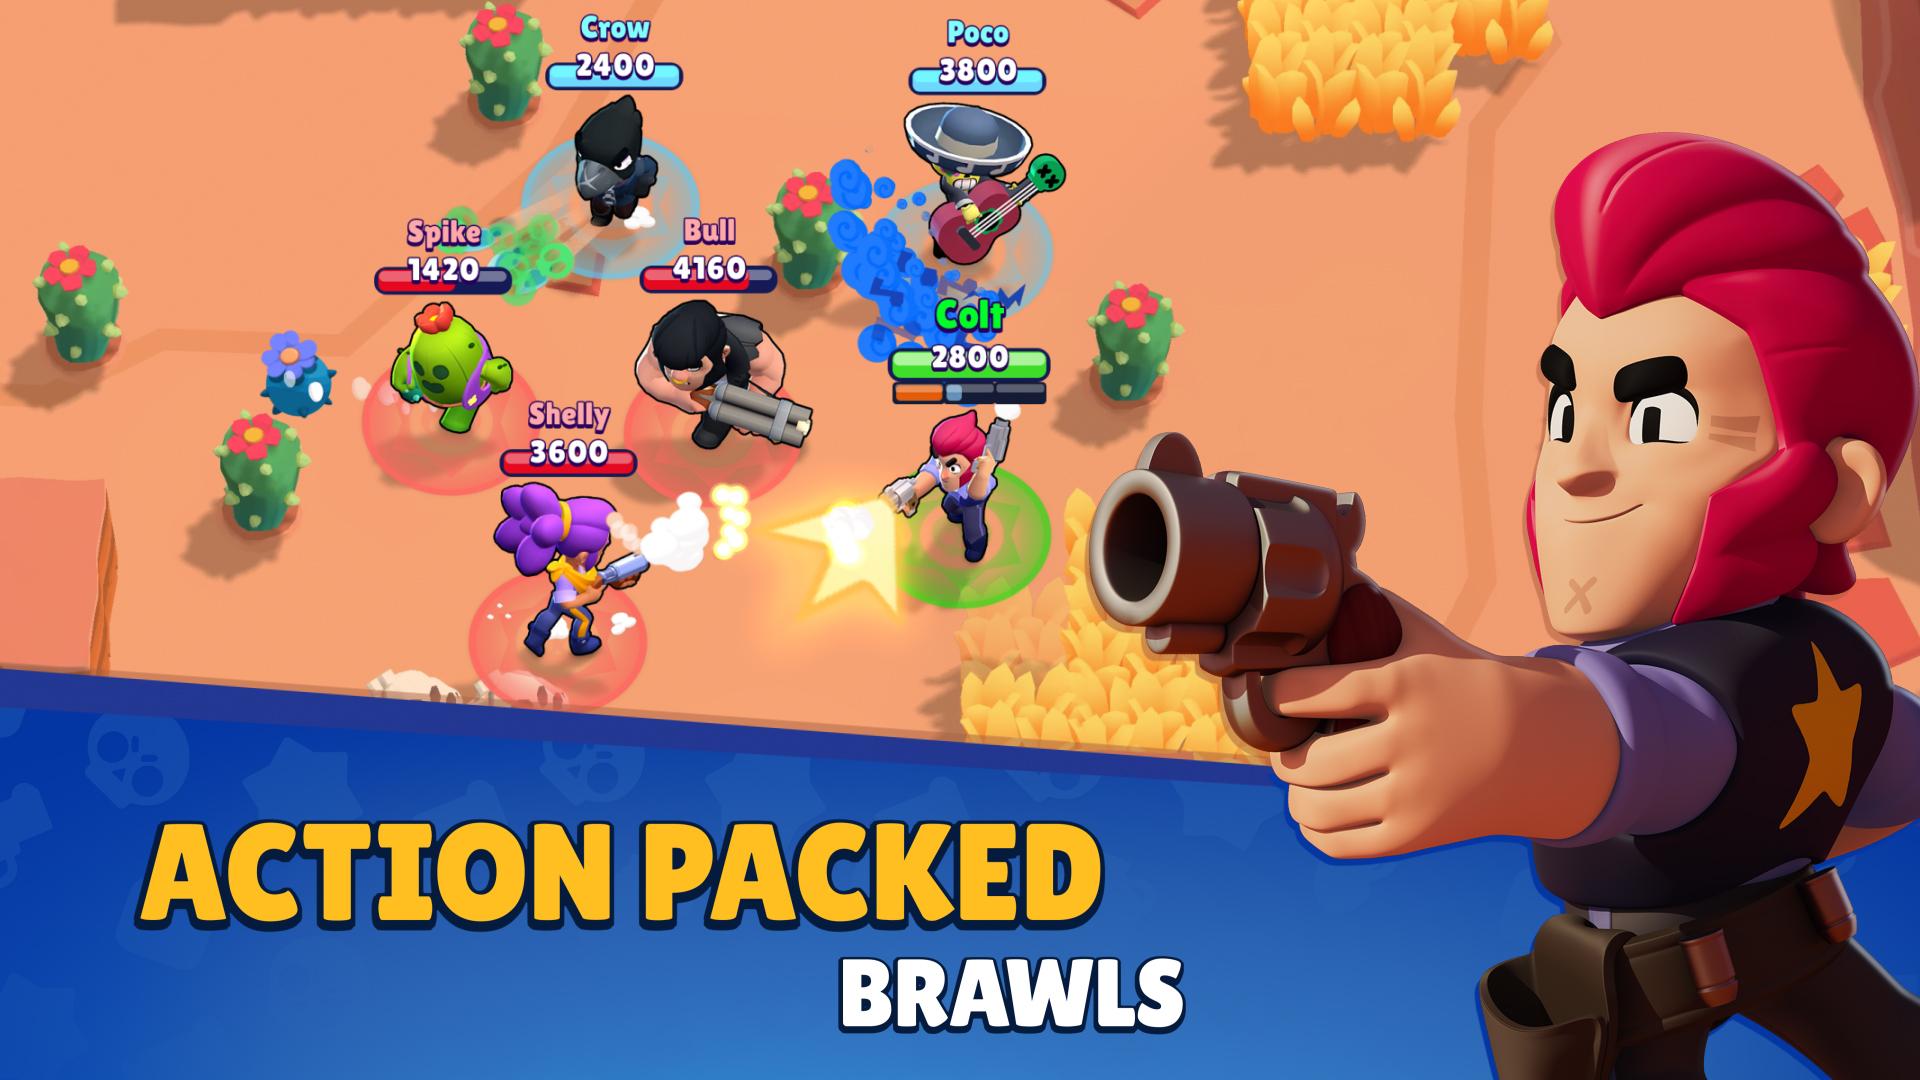 Brawl Stars How To Get The Most Bang For Your Gem Buck Premium Currency Guide Gameranx - how to get gems in brawl stars fast